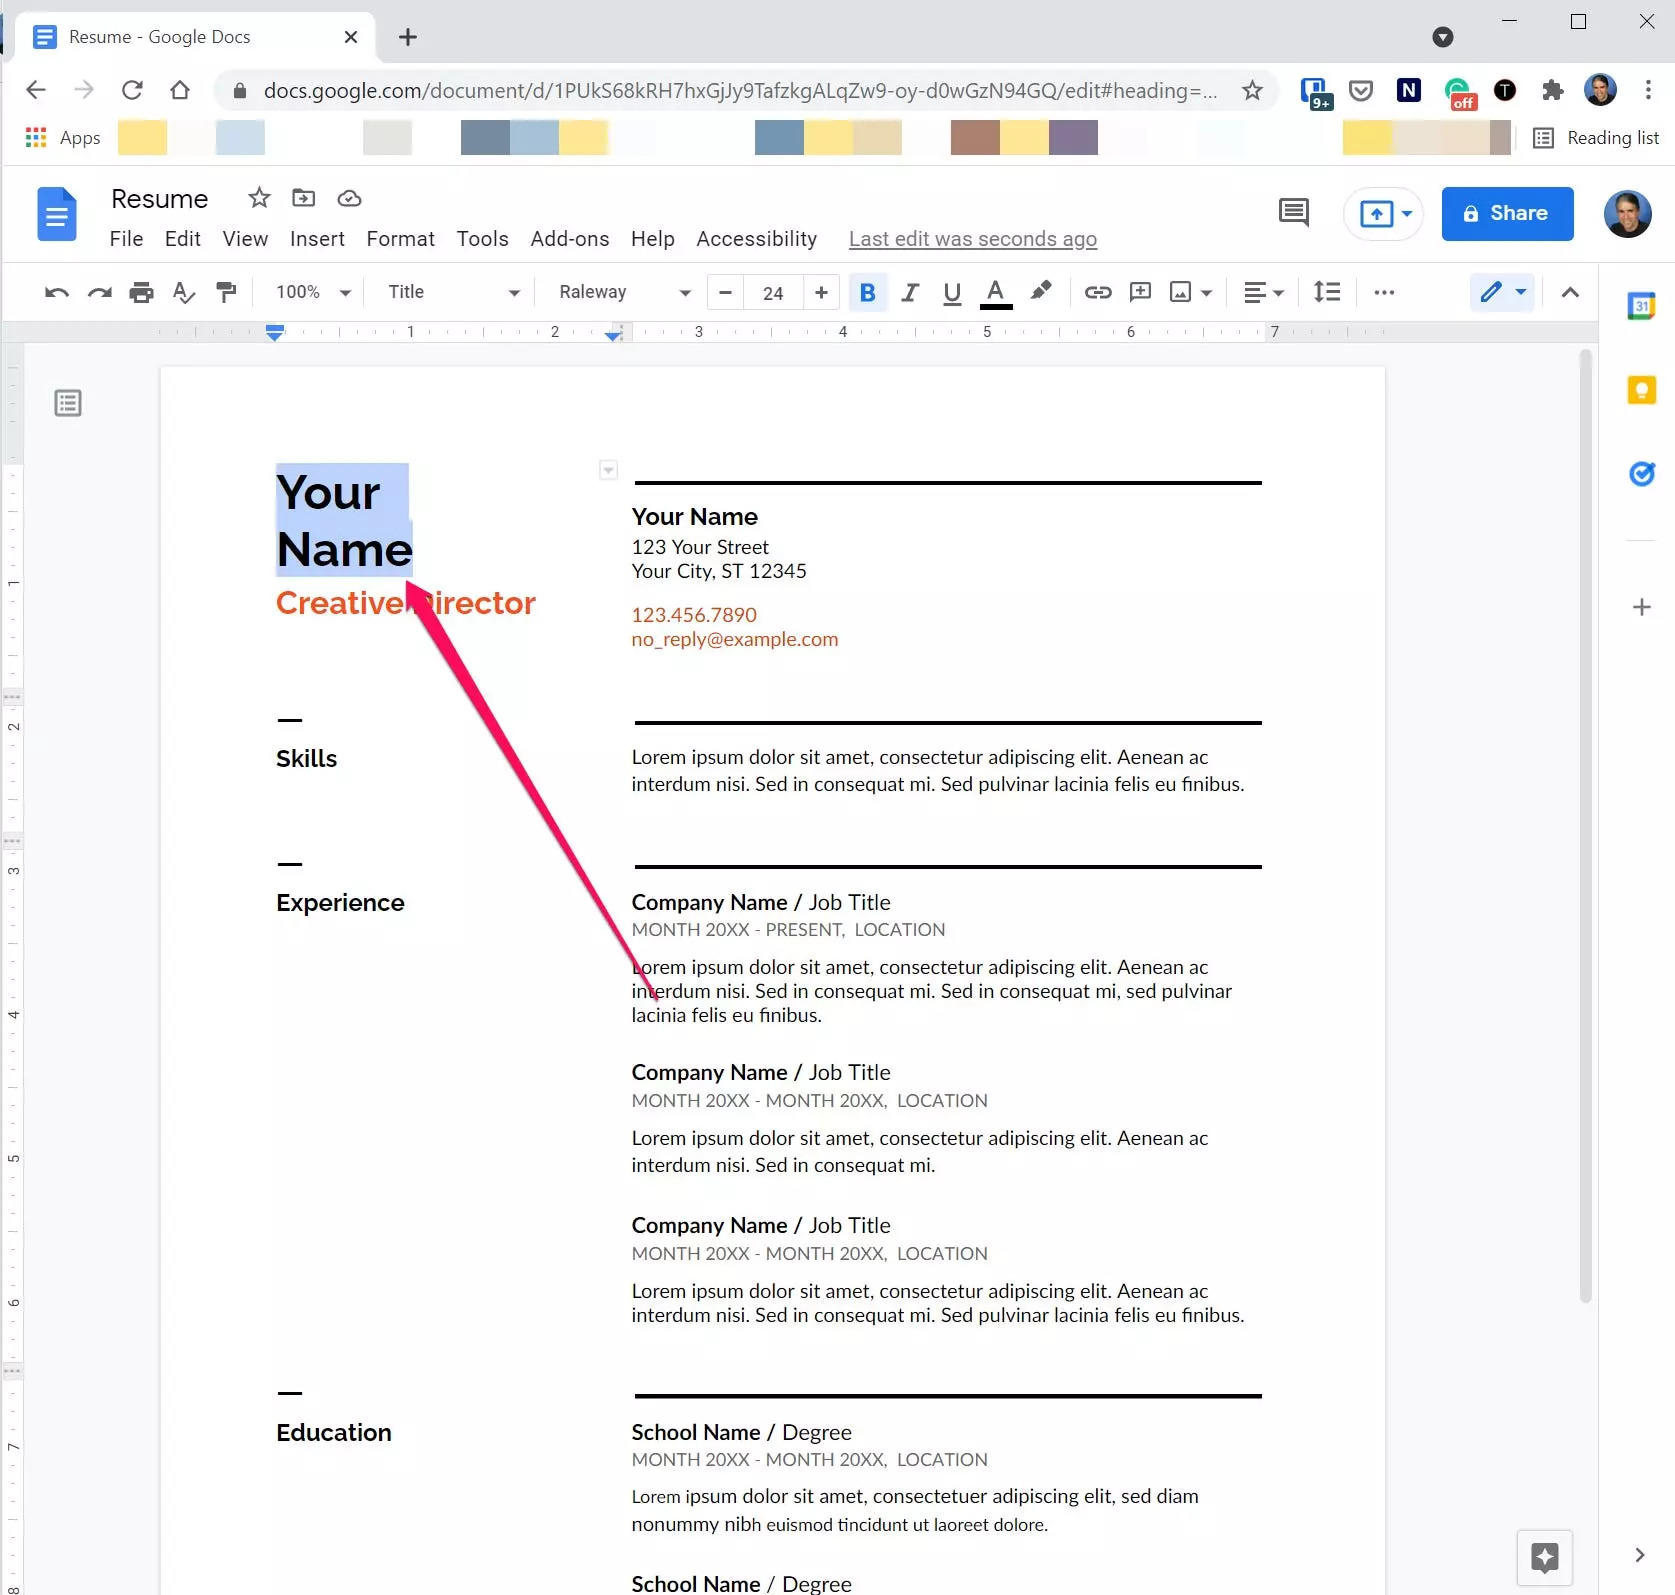 How to Use a Google Docs Resume Template to Create and Edit a Professional Document for Job Applications